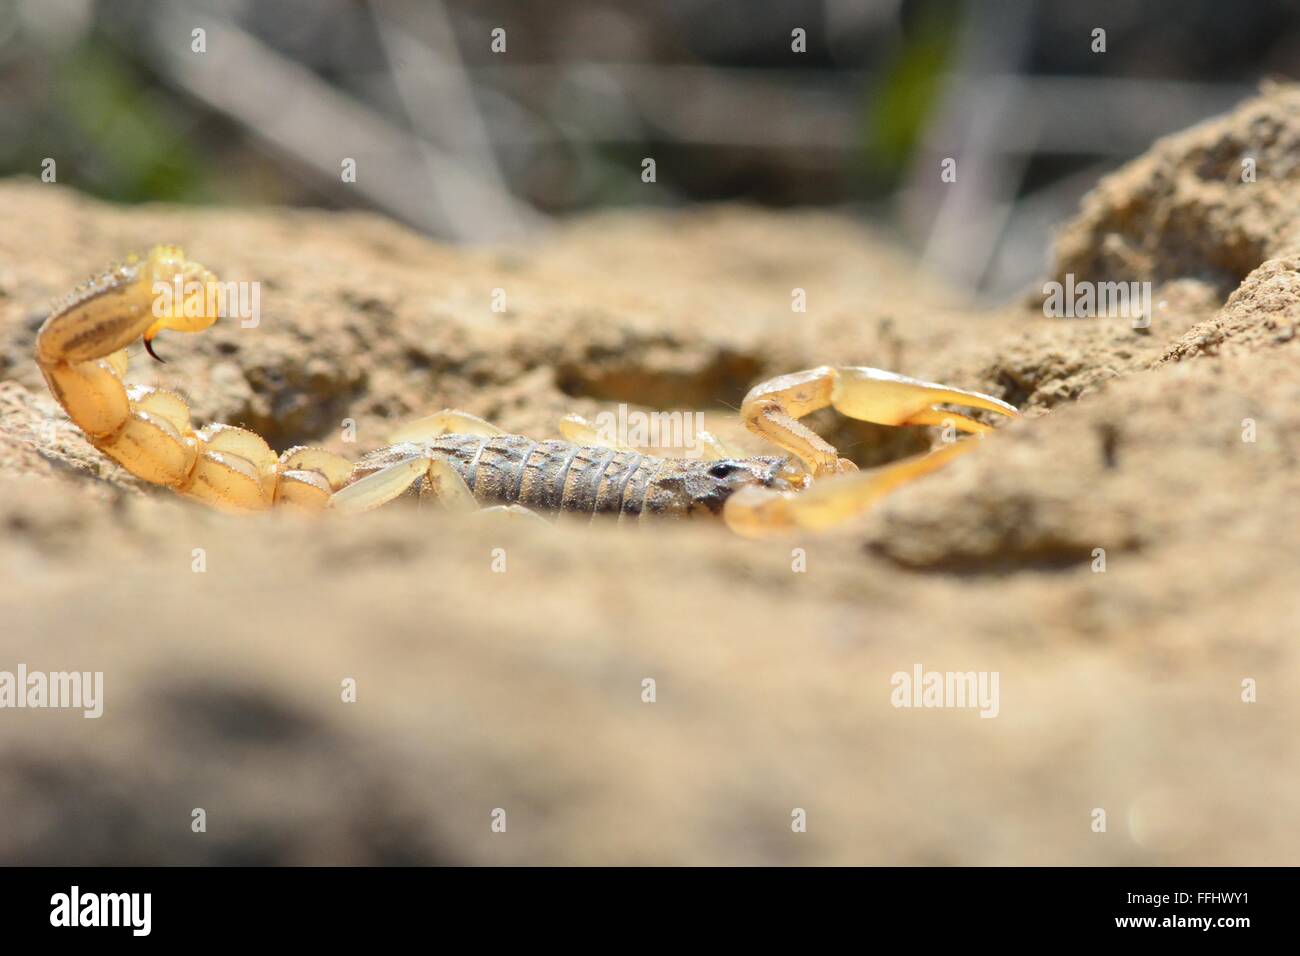 Common yellow scorpion (Buthus occitanus) lying against rock. A scorpion in the family Buthidae, in hills around 15km from Baku Stock Photo